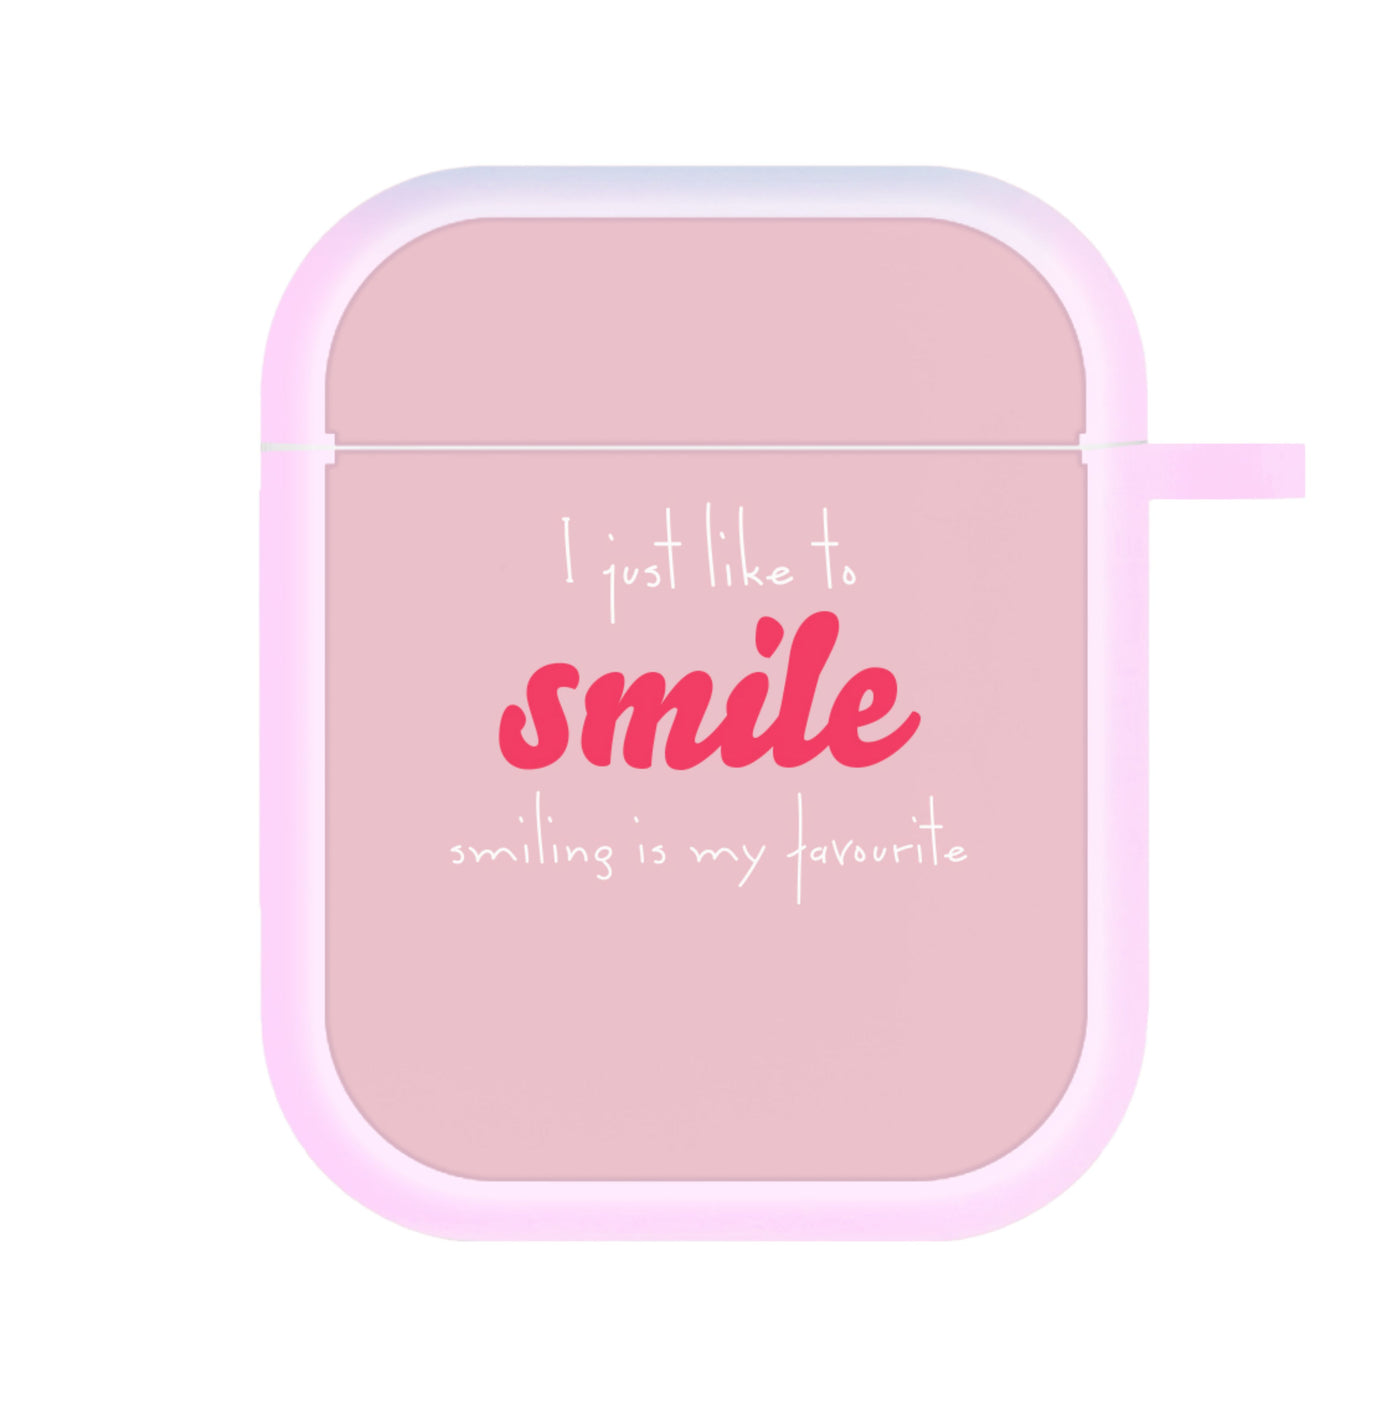 I Just Like To Smile - Elf AirPods Case